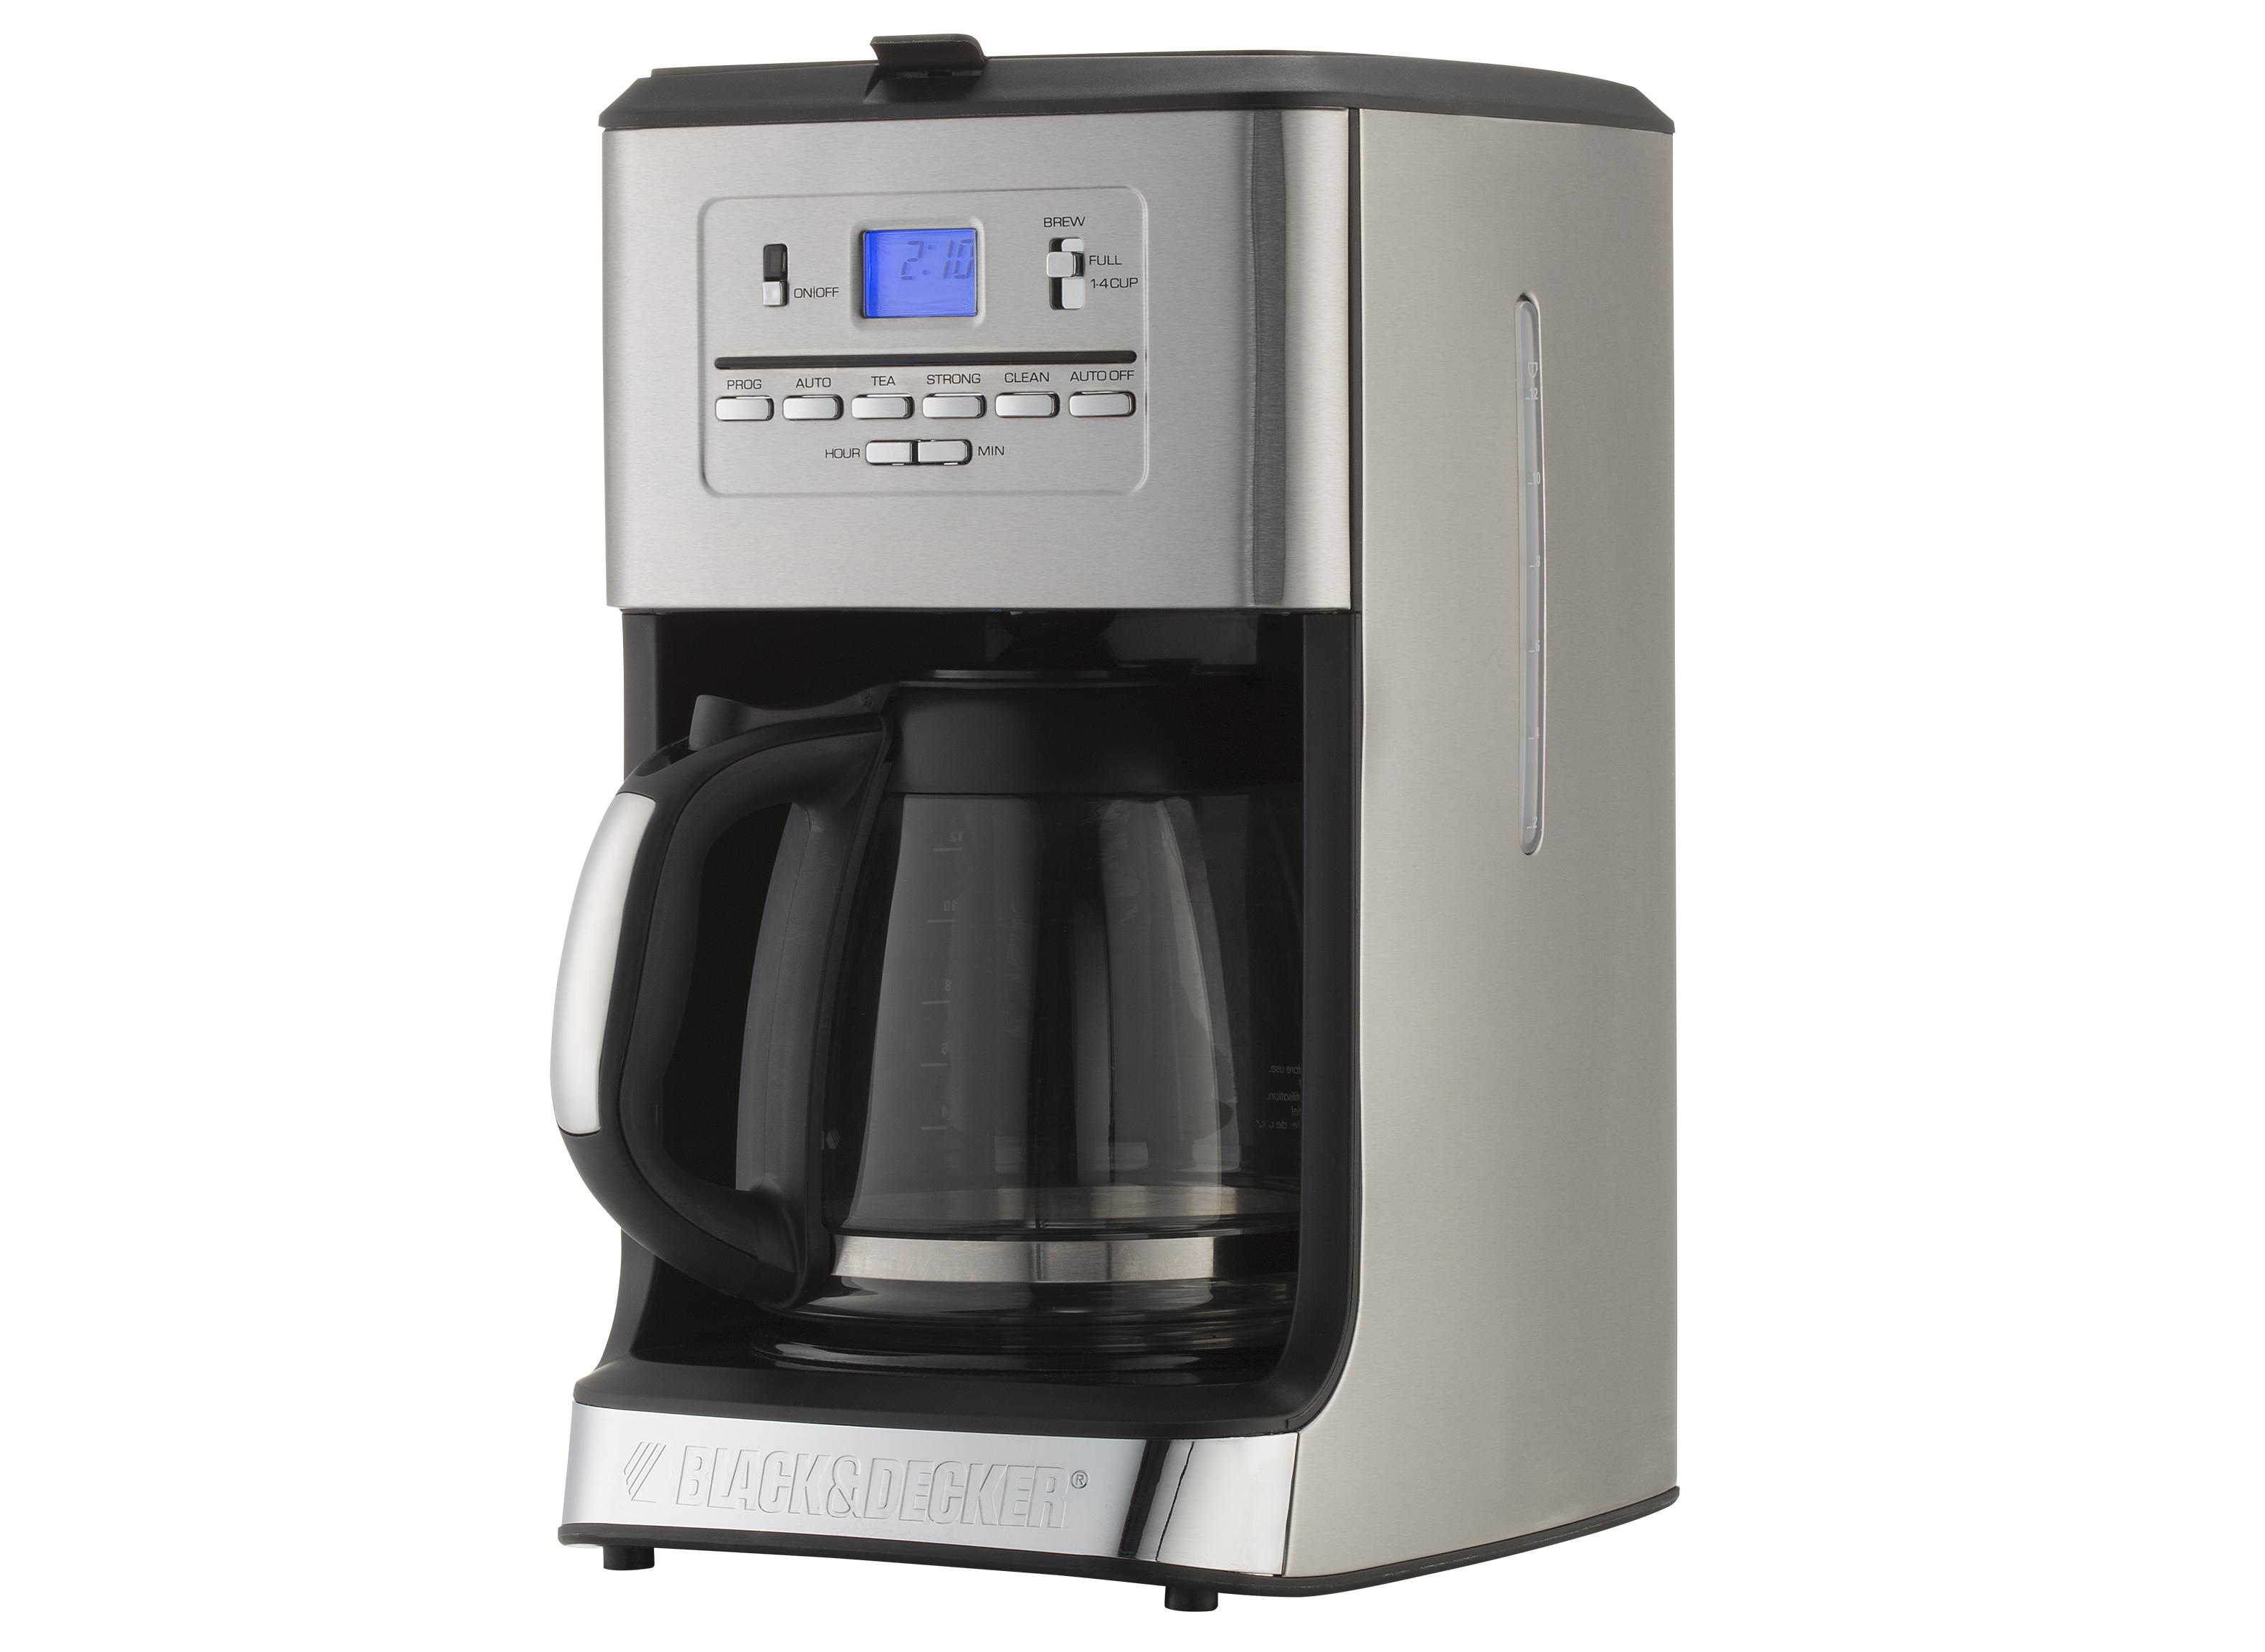 Black+Decker CM2036S 12-cup Thermal Coffee Maker Review - Consumer Reports